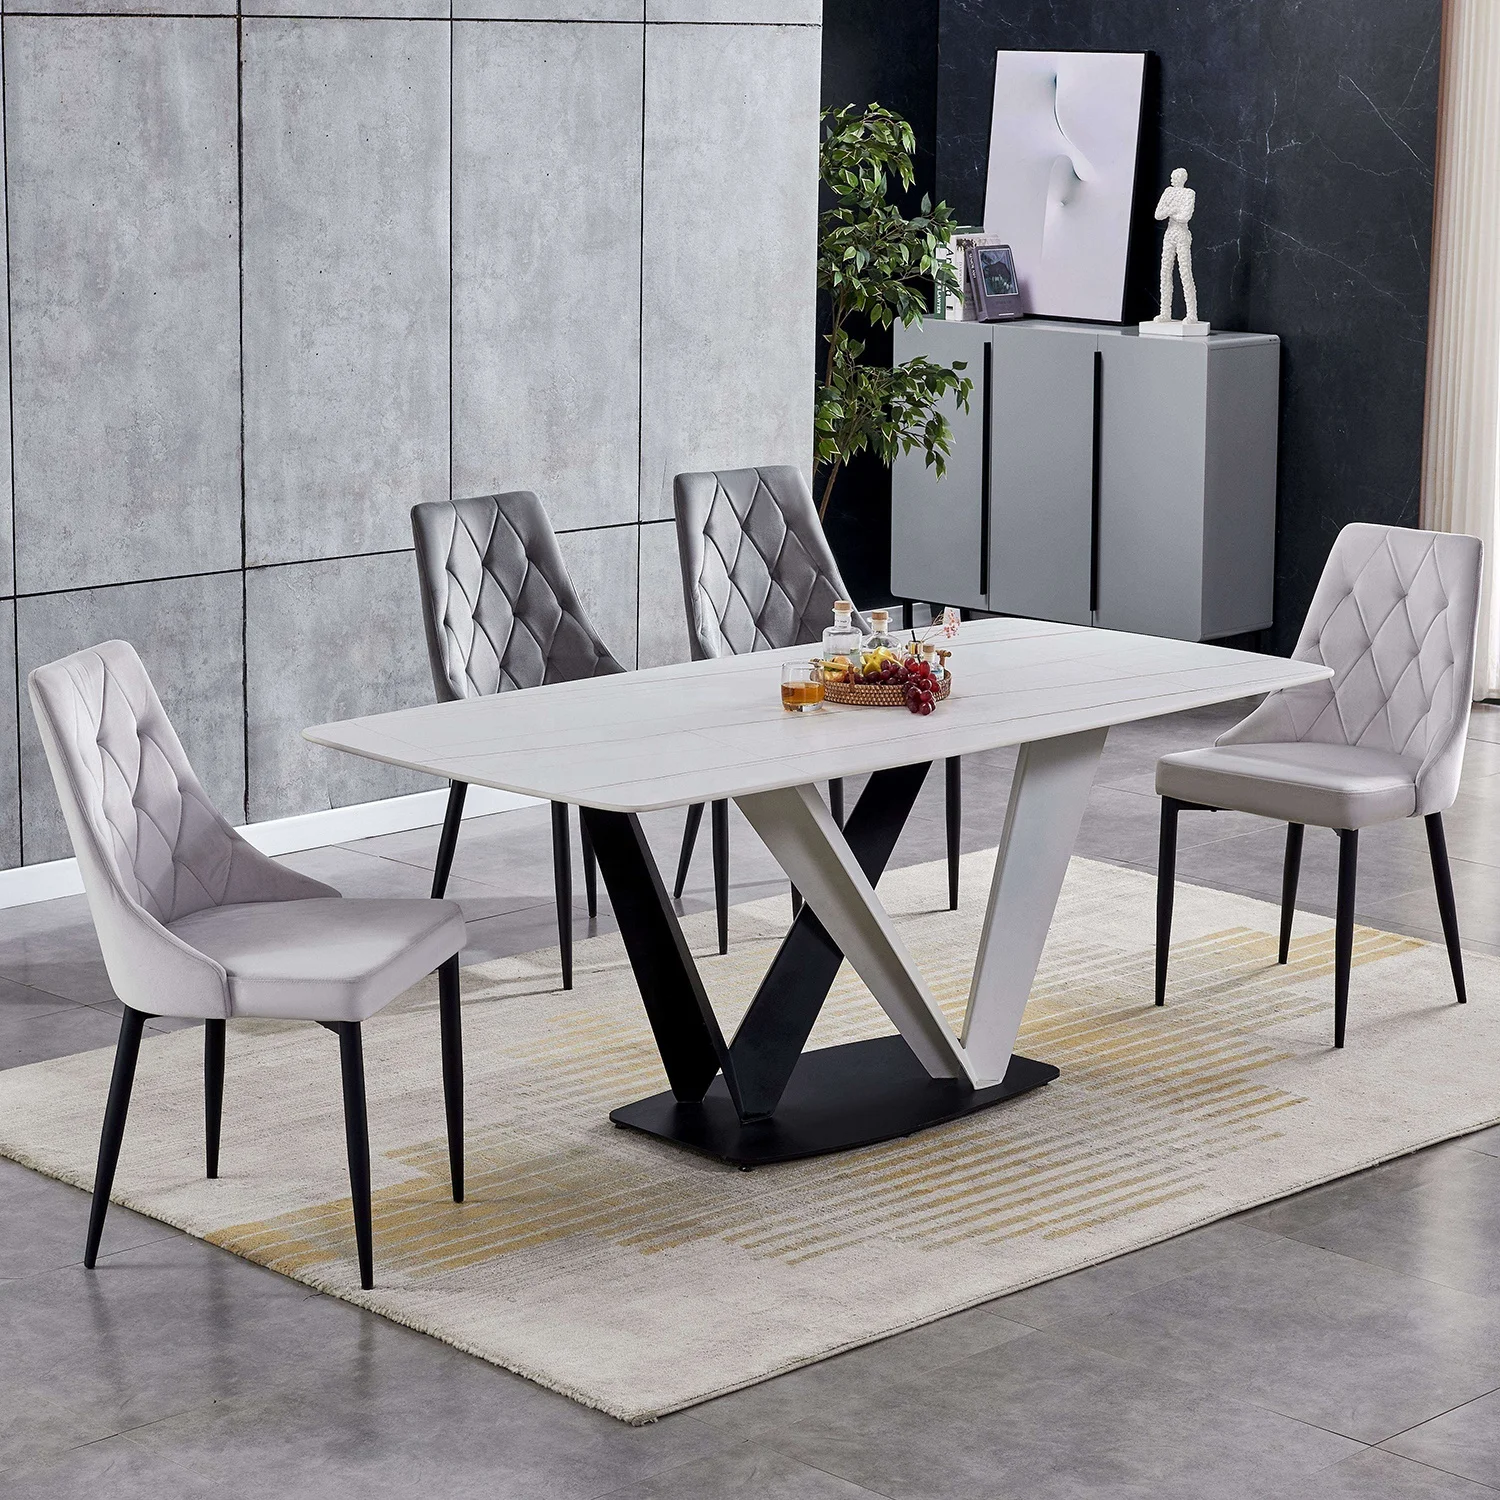 Dining Table And Chairs Stainless Steel Frame Luxury Dinning Table Set Modern Marble Dining Room Table living room set